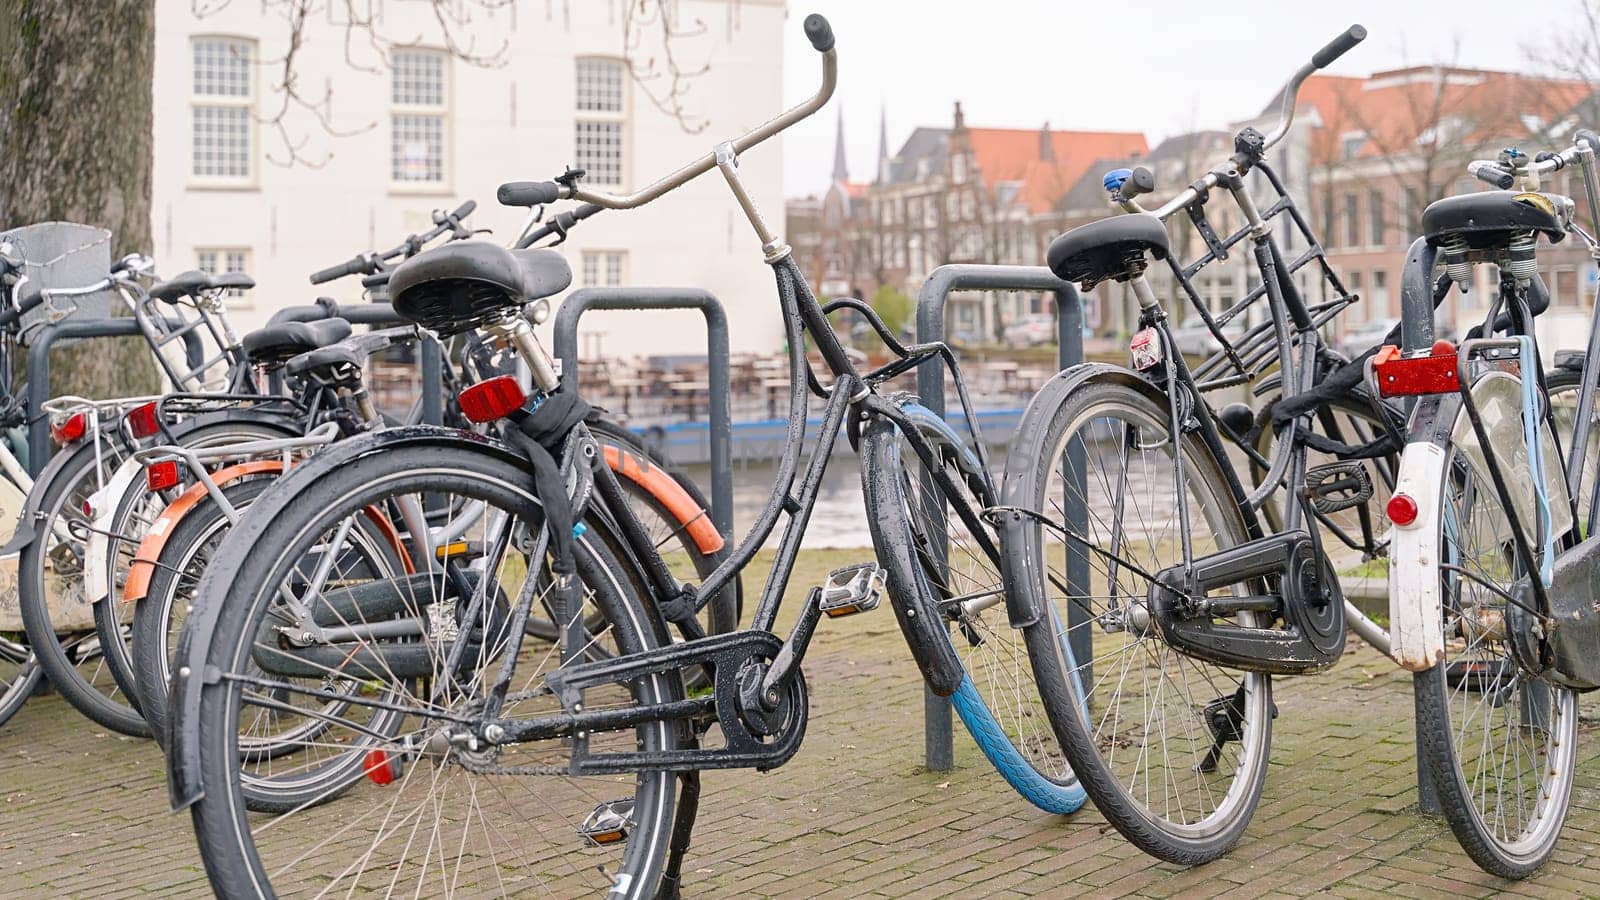 Bicycles parked alongside a channel on beautiful old buildings background.